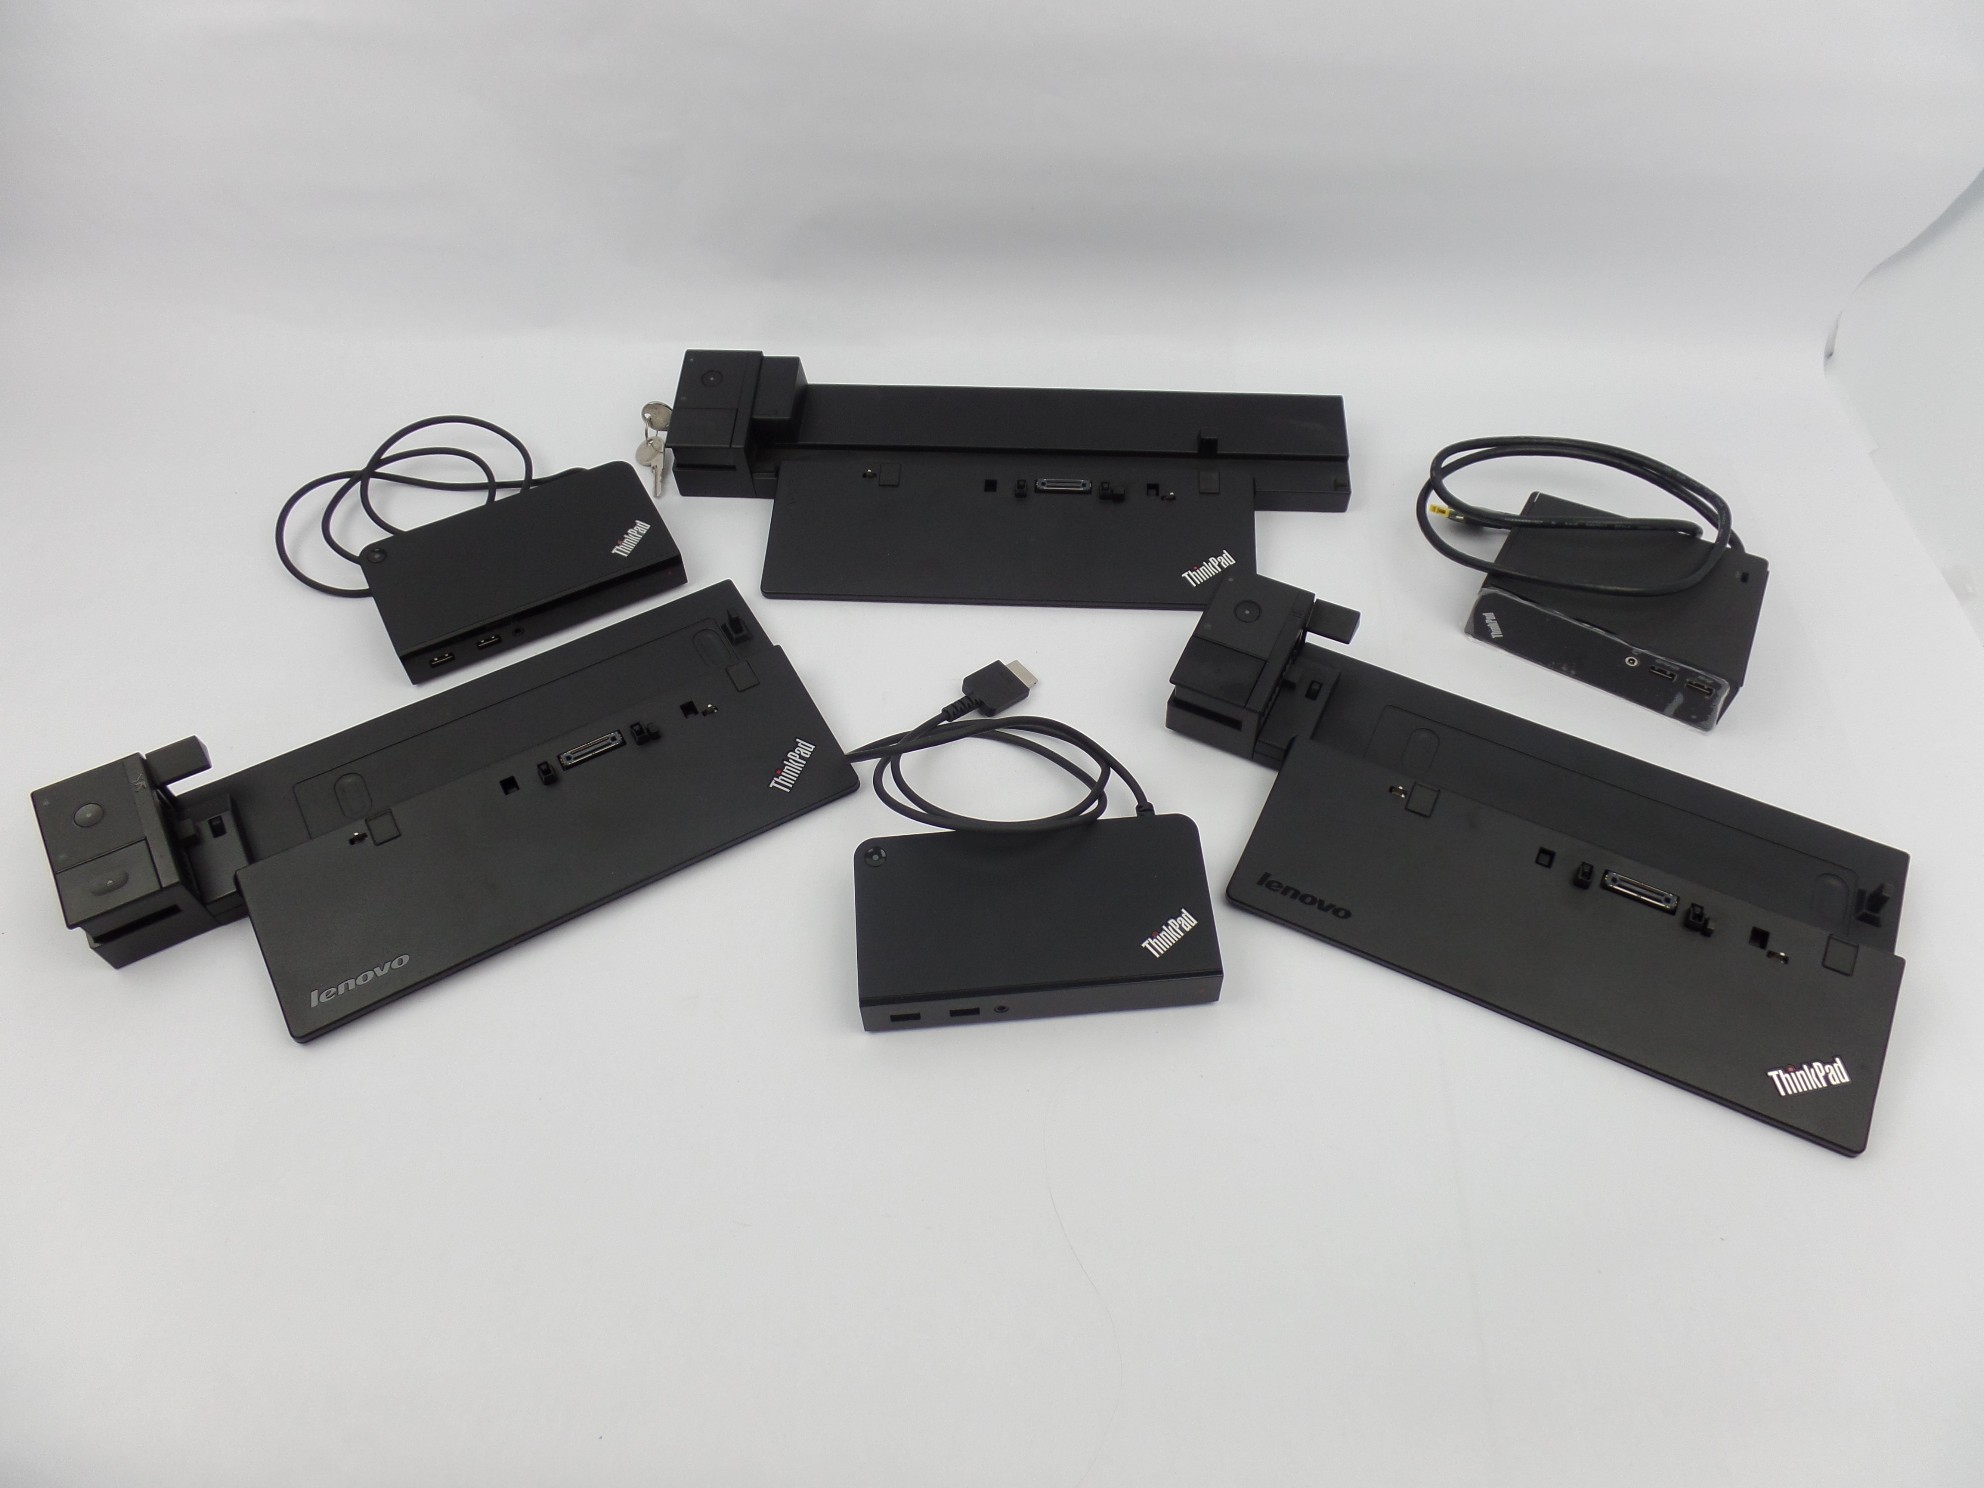 For parts: Lot of 6 Lenovo Thinkpad Docking Stations 